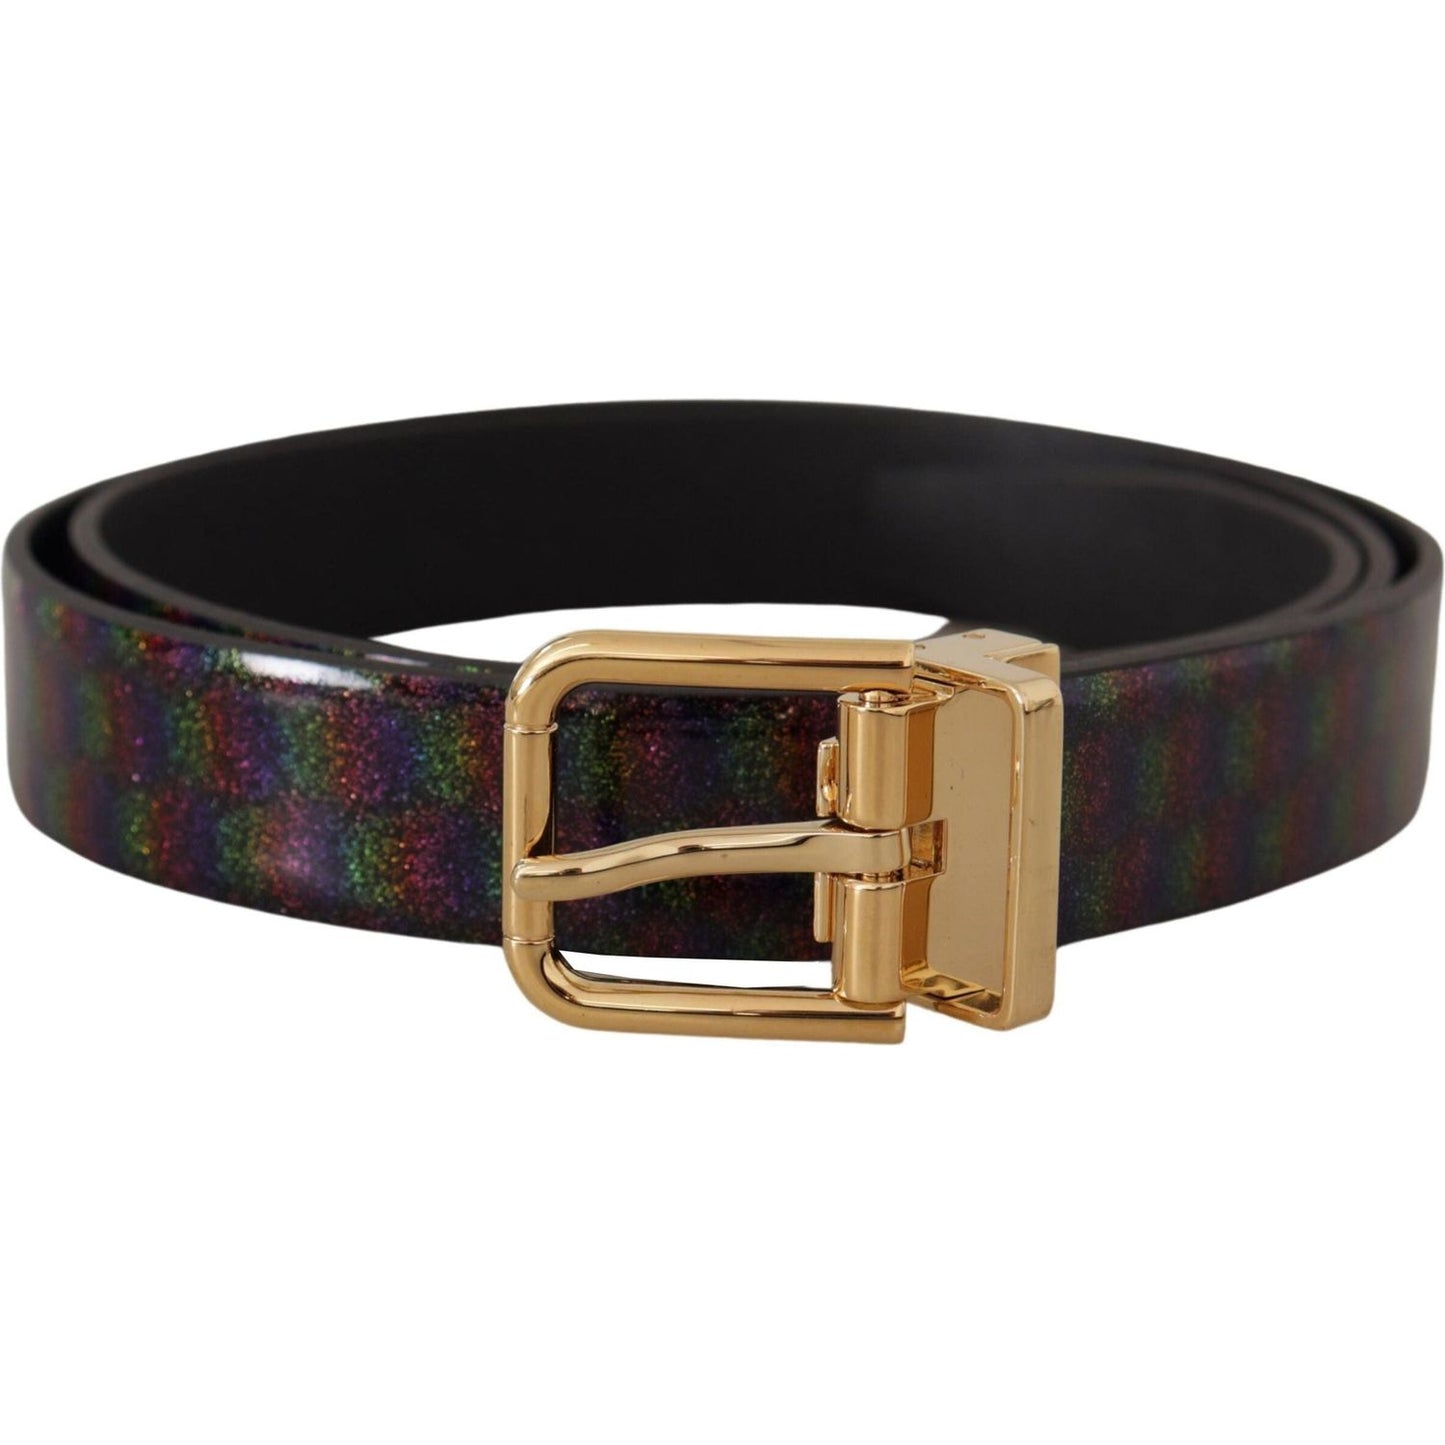 Elegant Vernice Leather Belt with Silver Buckle